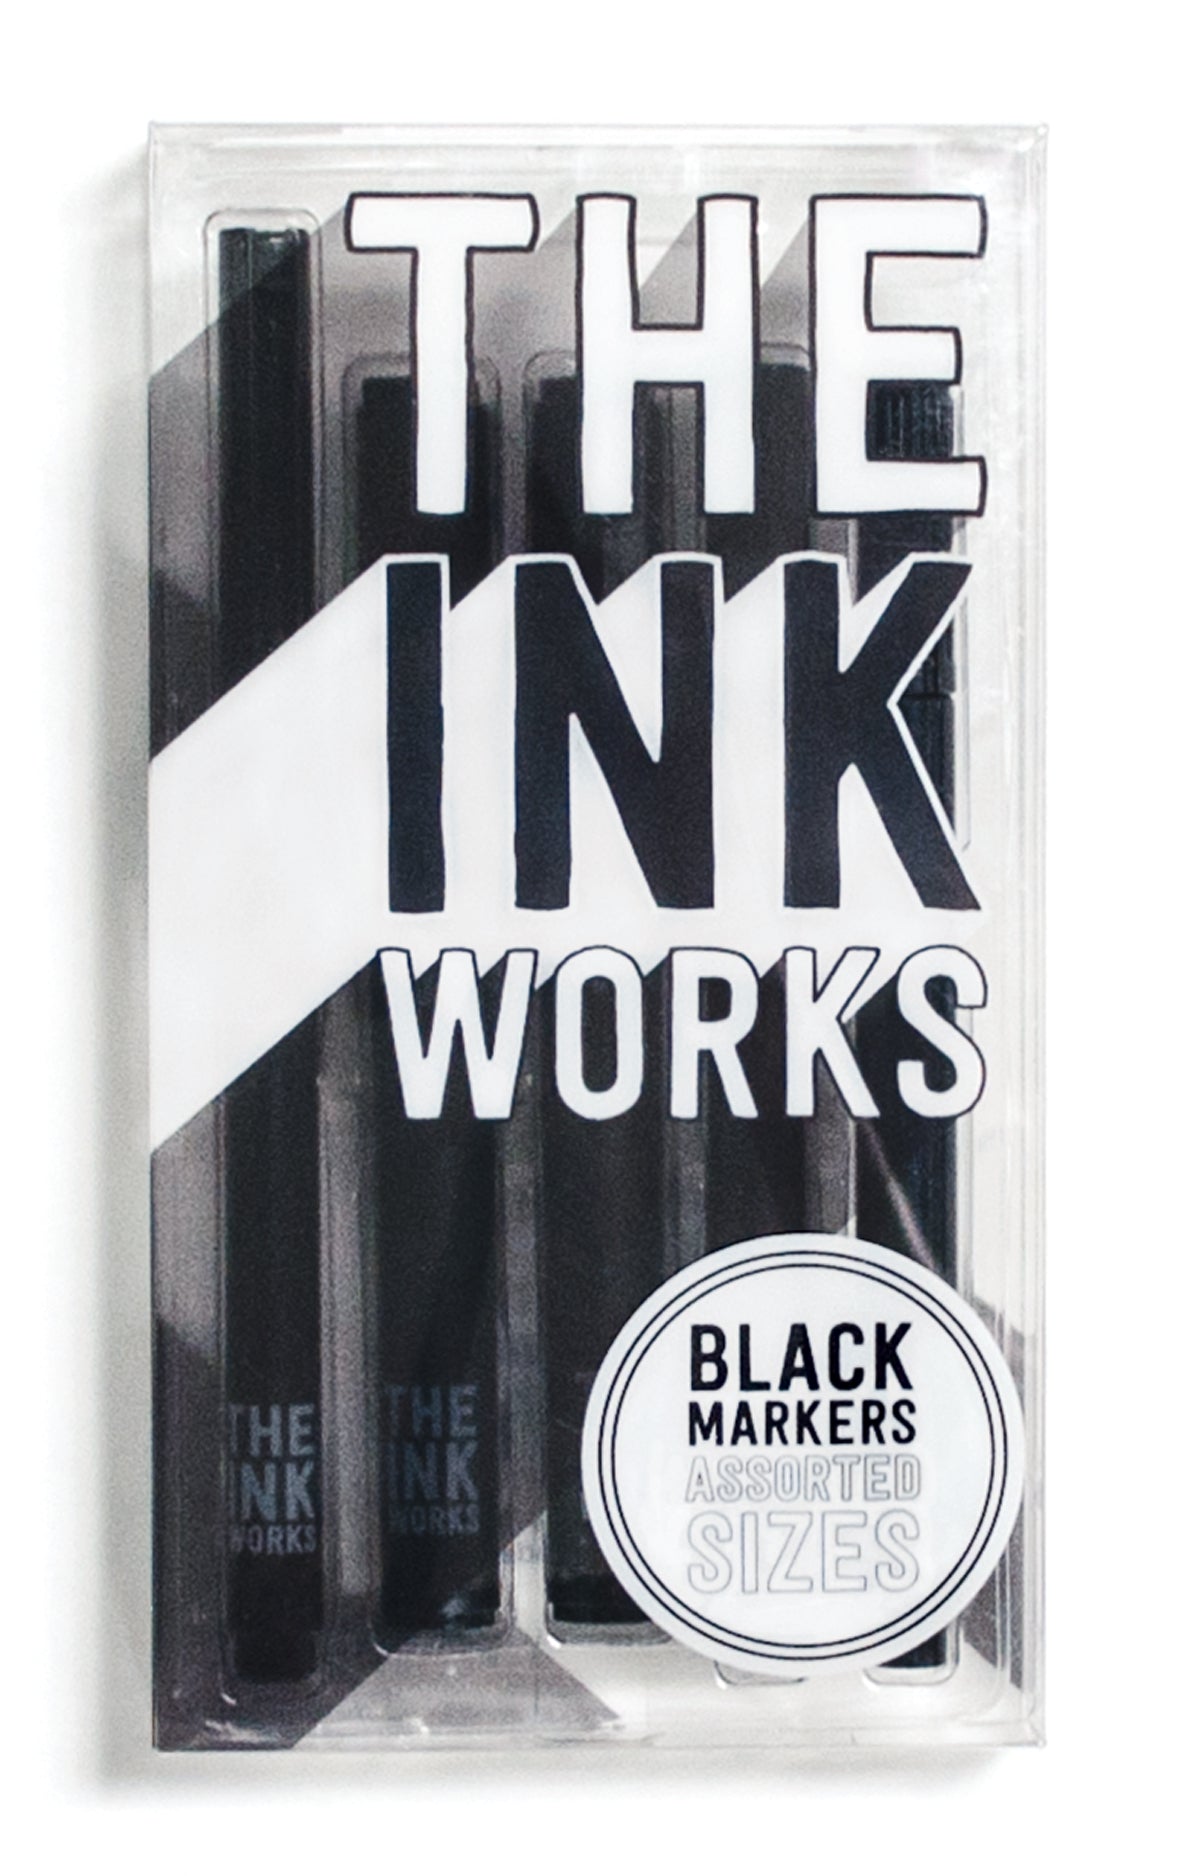 The Ink Works Markers - Set of 5 by Ooly